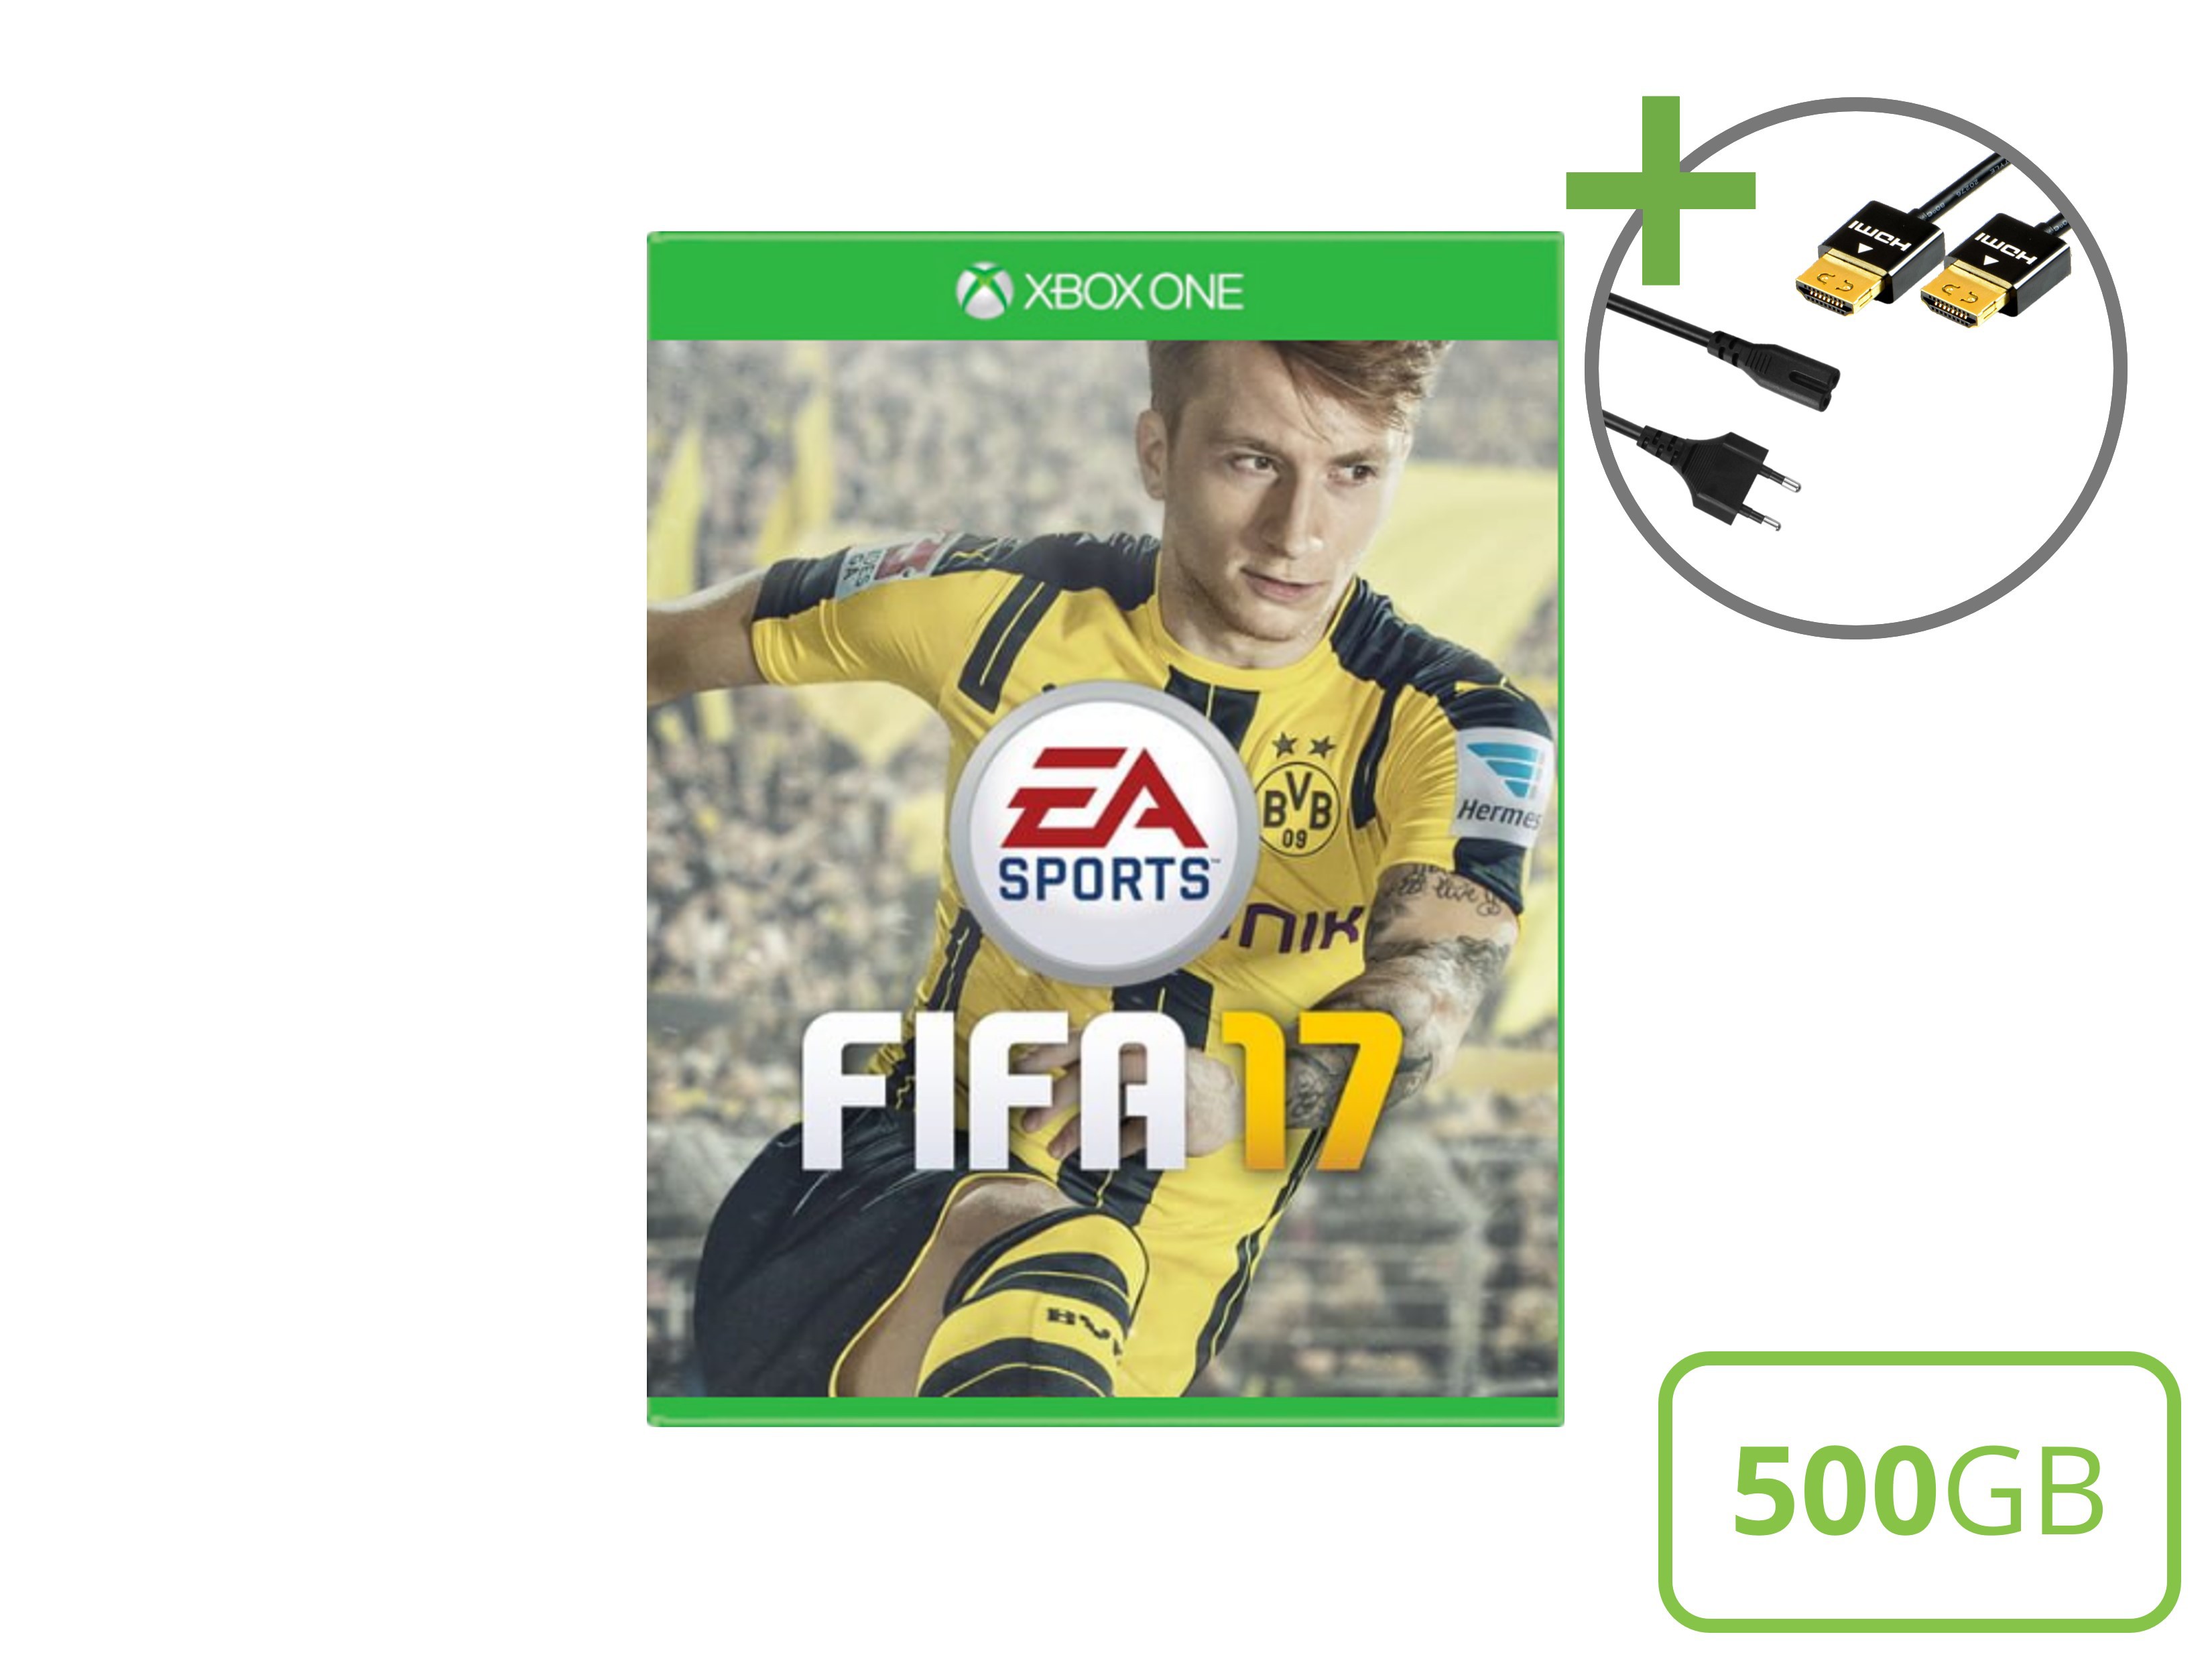 Microsoft Xbox One S Starter Pack - 500GB FIFA 17 Edition - Xbox One Hardware - 4